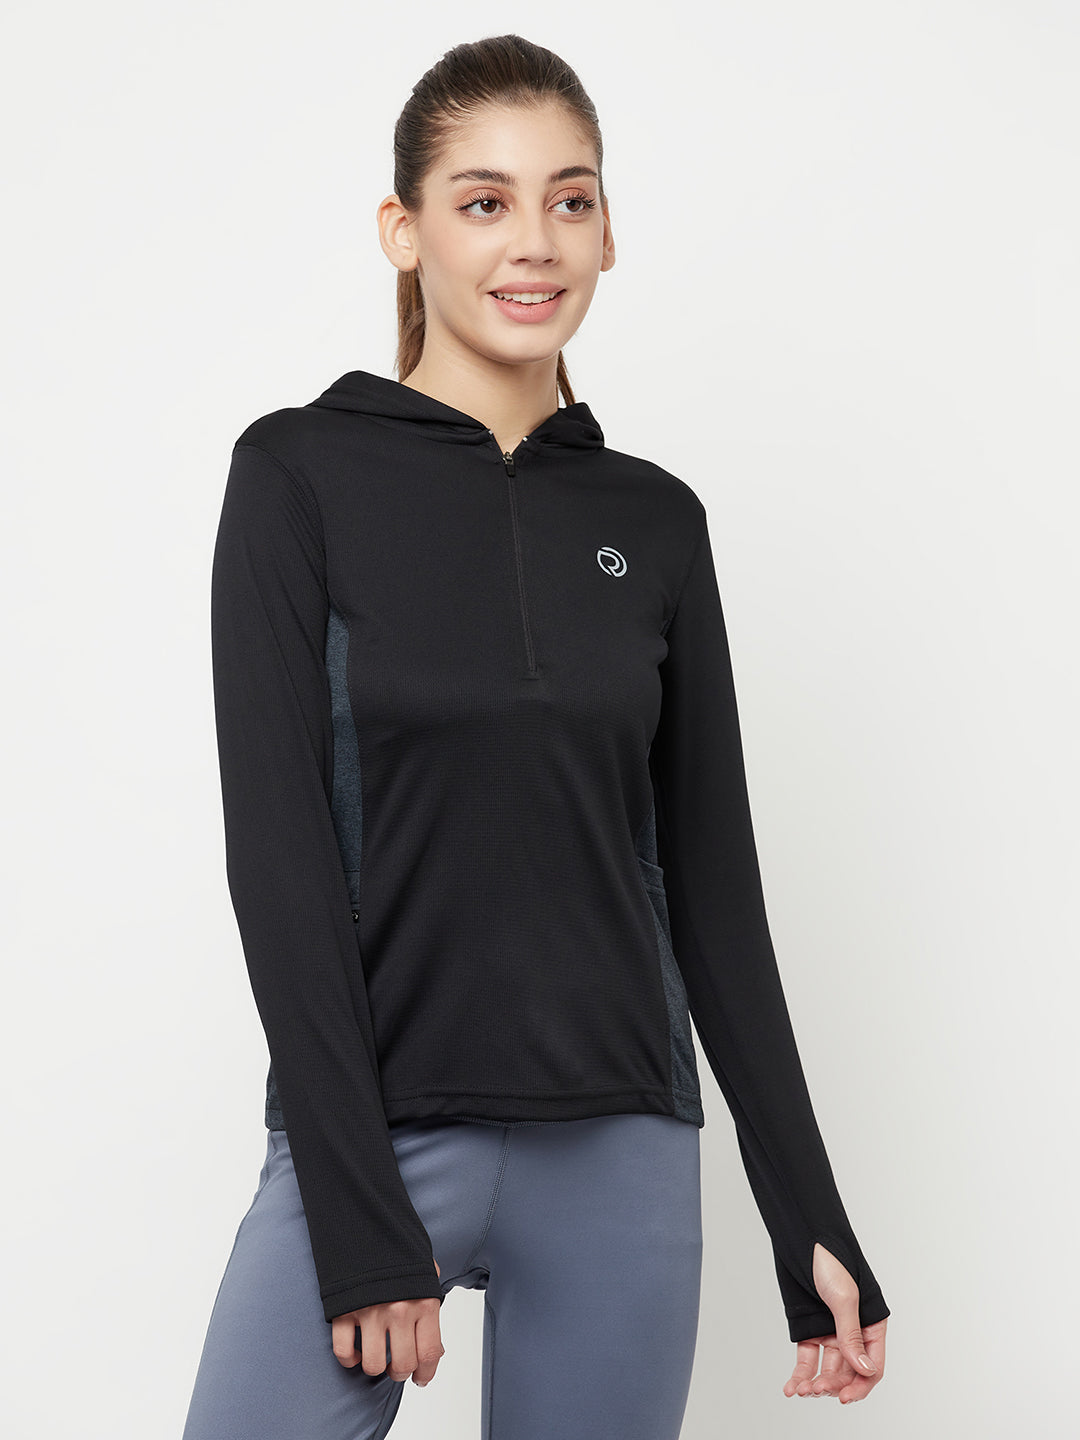 Hooded full sleeve top  with zipper pocket for women's training & sports